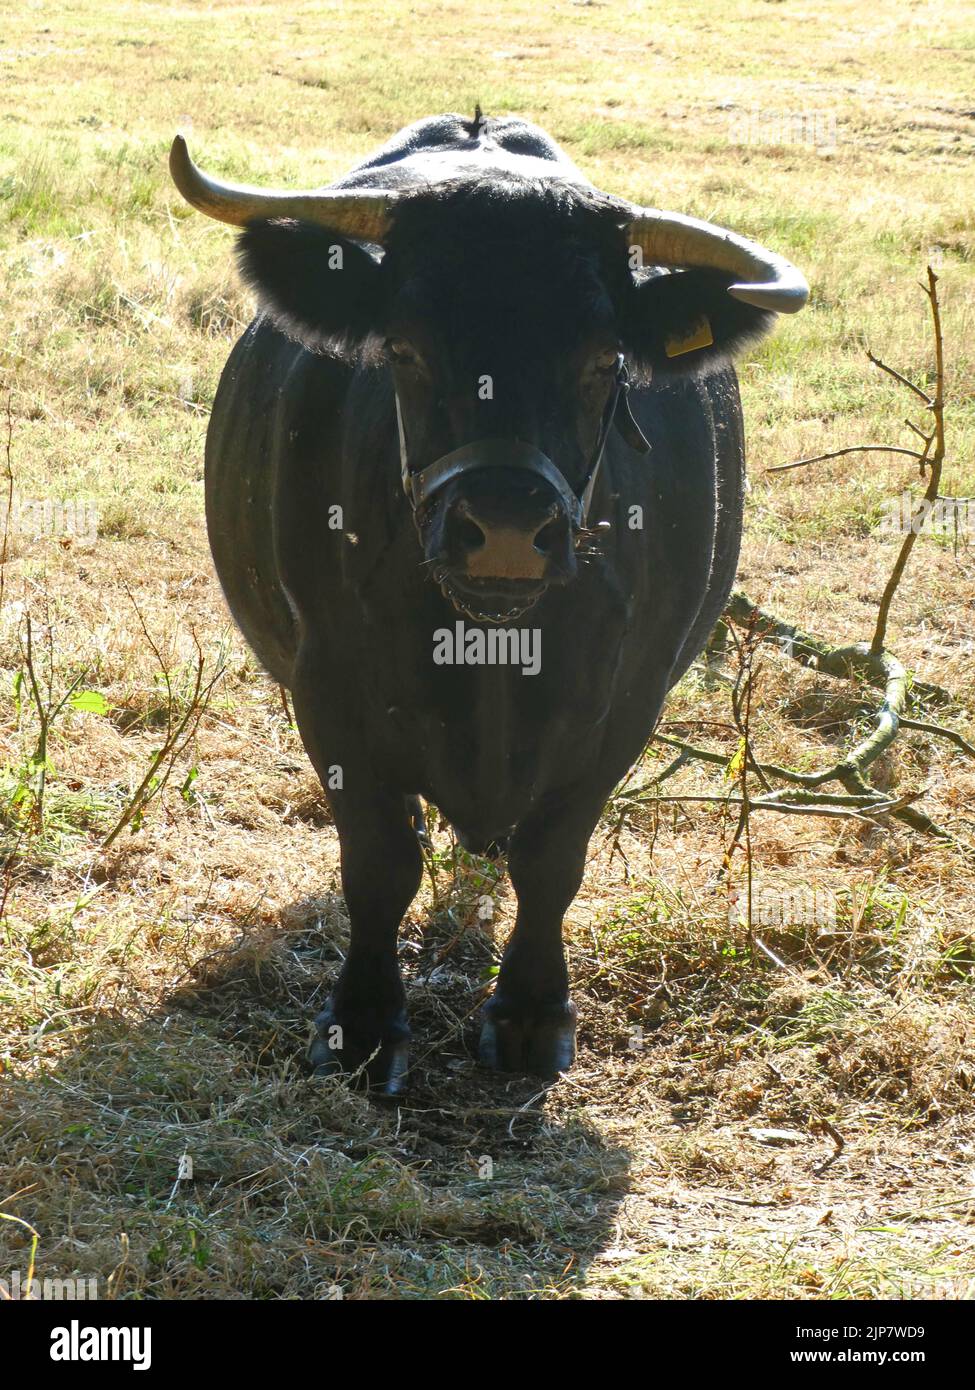 A black dexter cow posing for the camera. Dexter cattle are a breed of cattle originating in Ireland. It's a small dual-purpose breed. Stock Photo